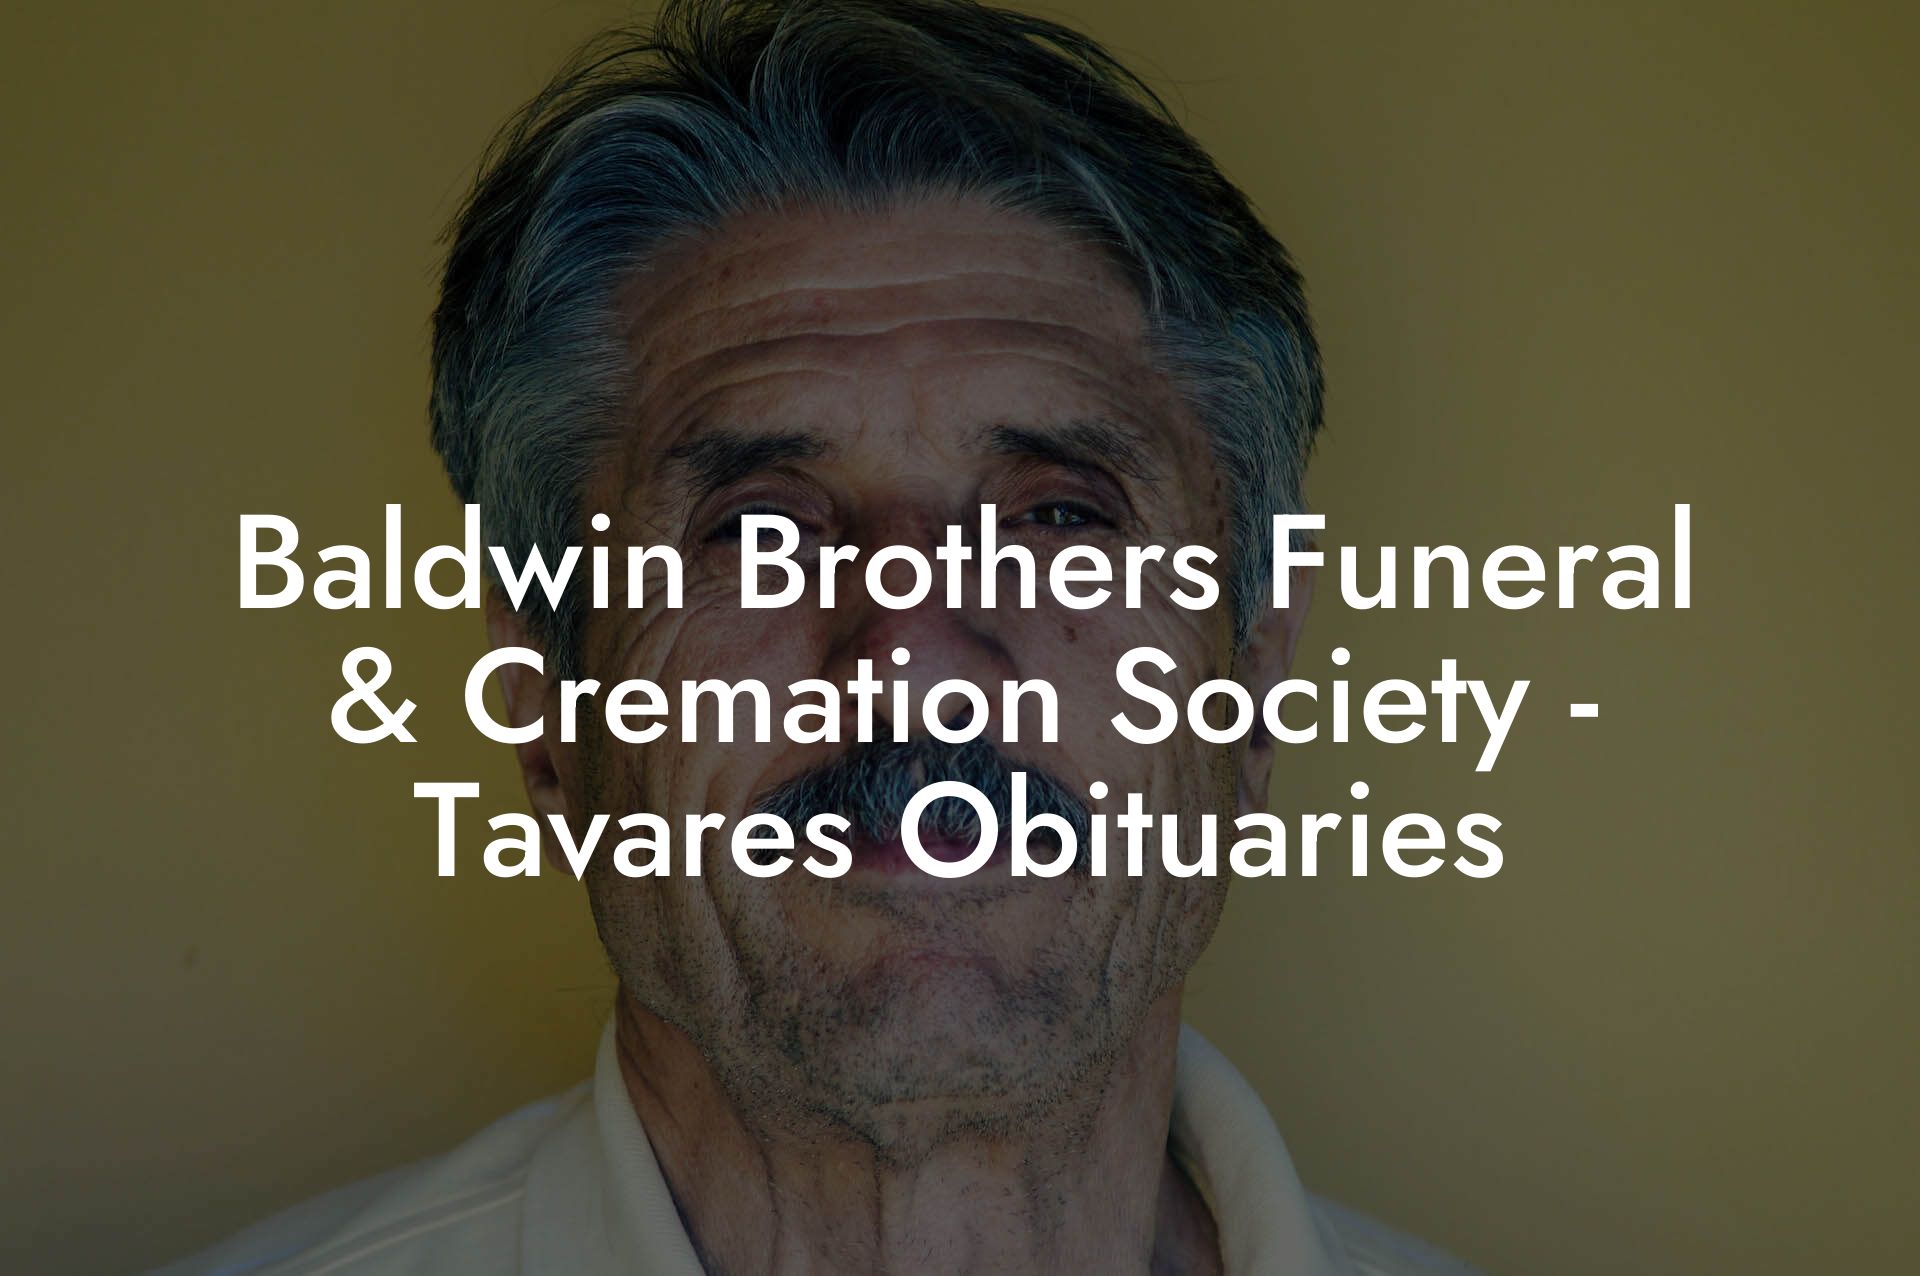 Baldwin Brothers Funeral & Cremation Society - Tavares Obituaries